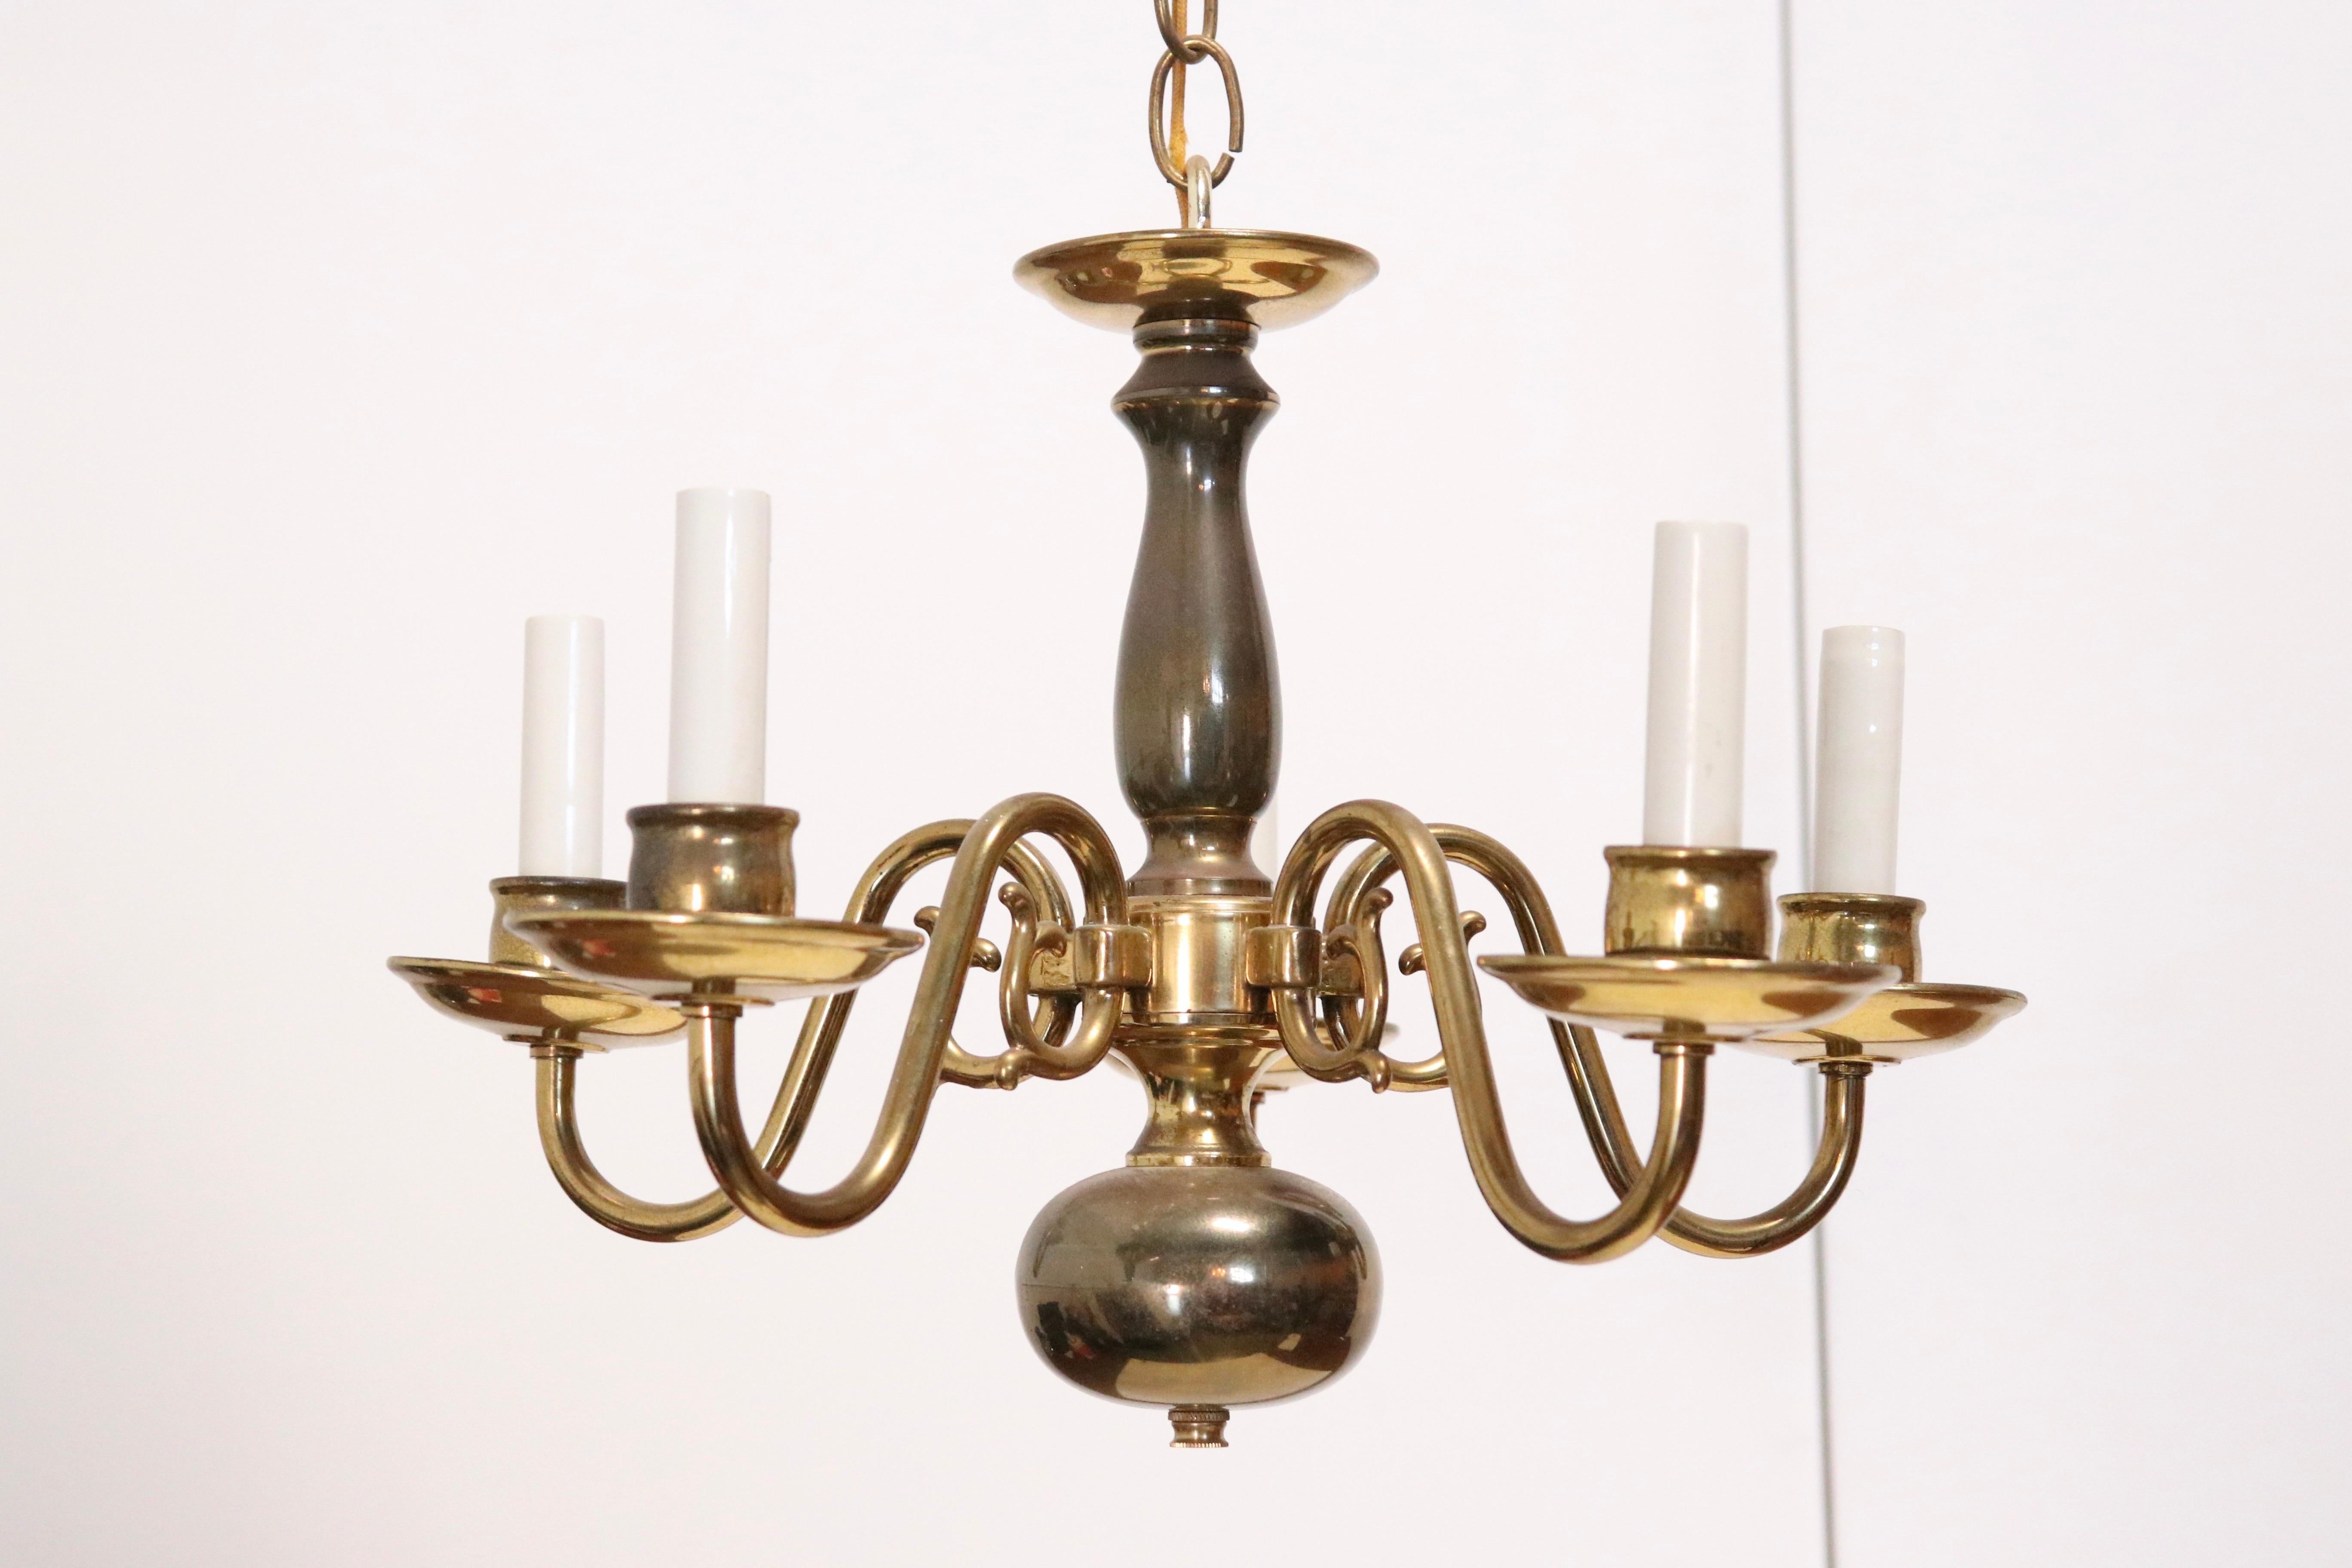 A Georgian-style petite chandelier with x electrified arms, in polished brass with a patinated brass center stem. Features classic English design elements including urn shape in the post and large globe below, with each curved scroll arm culminating